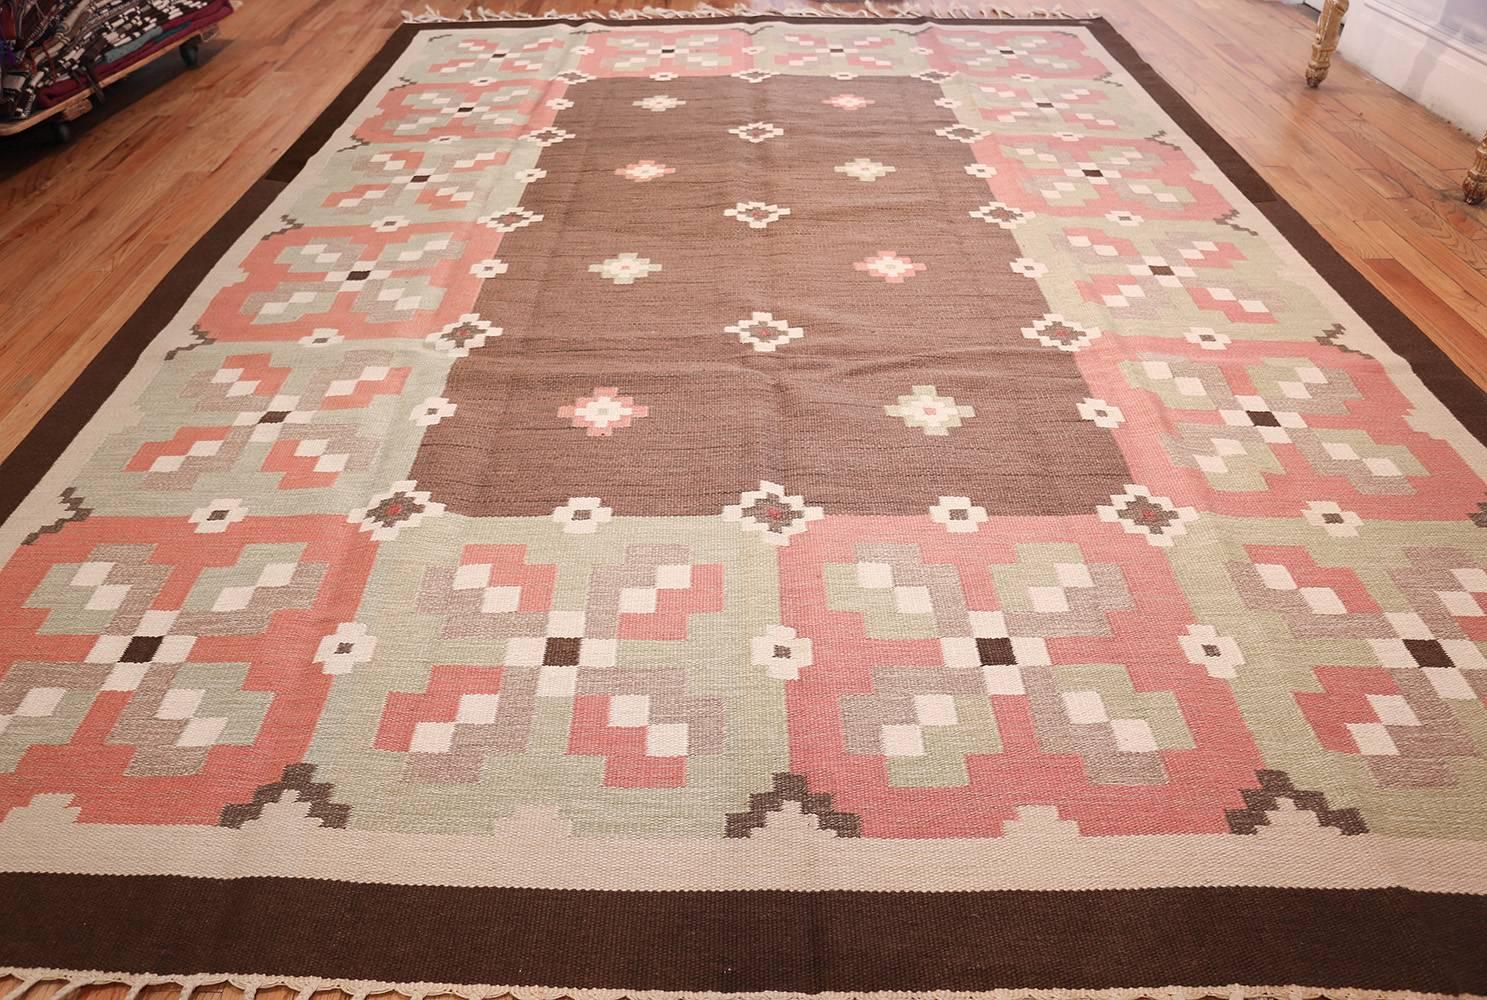 Mid-Century Modern Vintage Swedish Kilim. Size: 9 ft 9 in x 13 ft 4 in (2.97 m x 4.06 m)